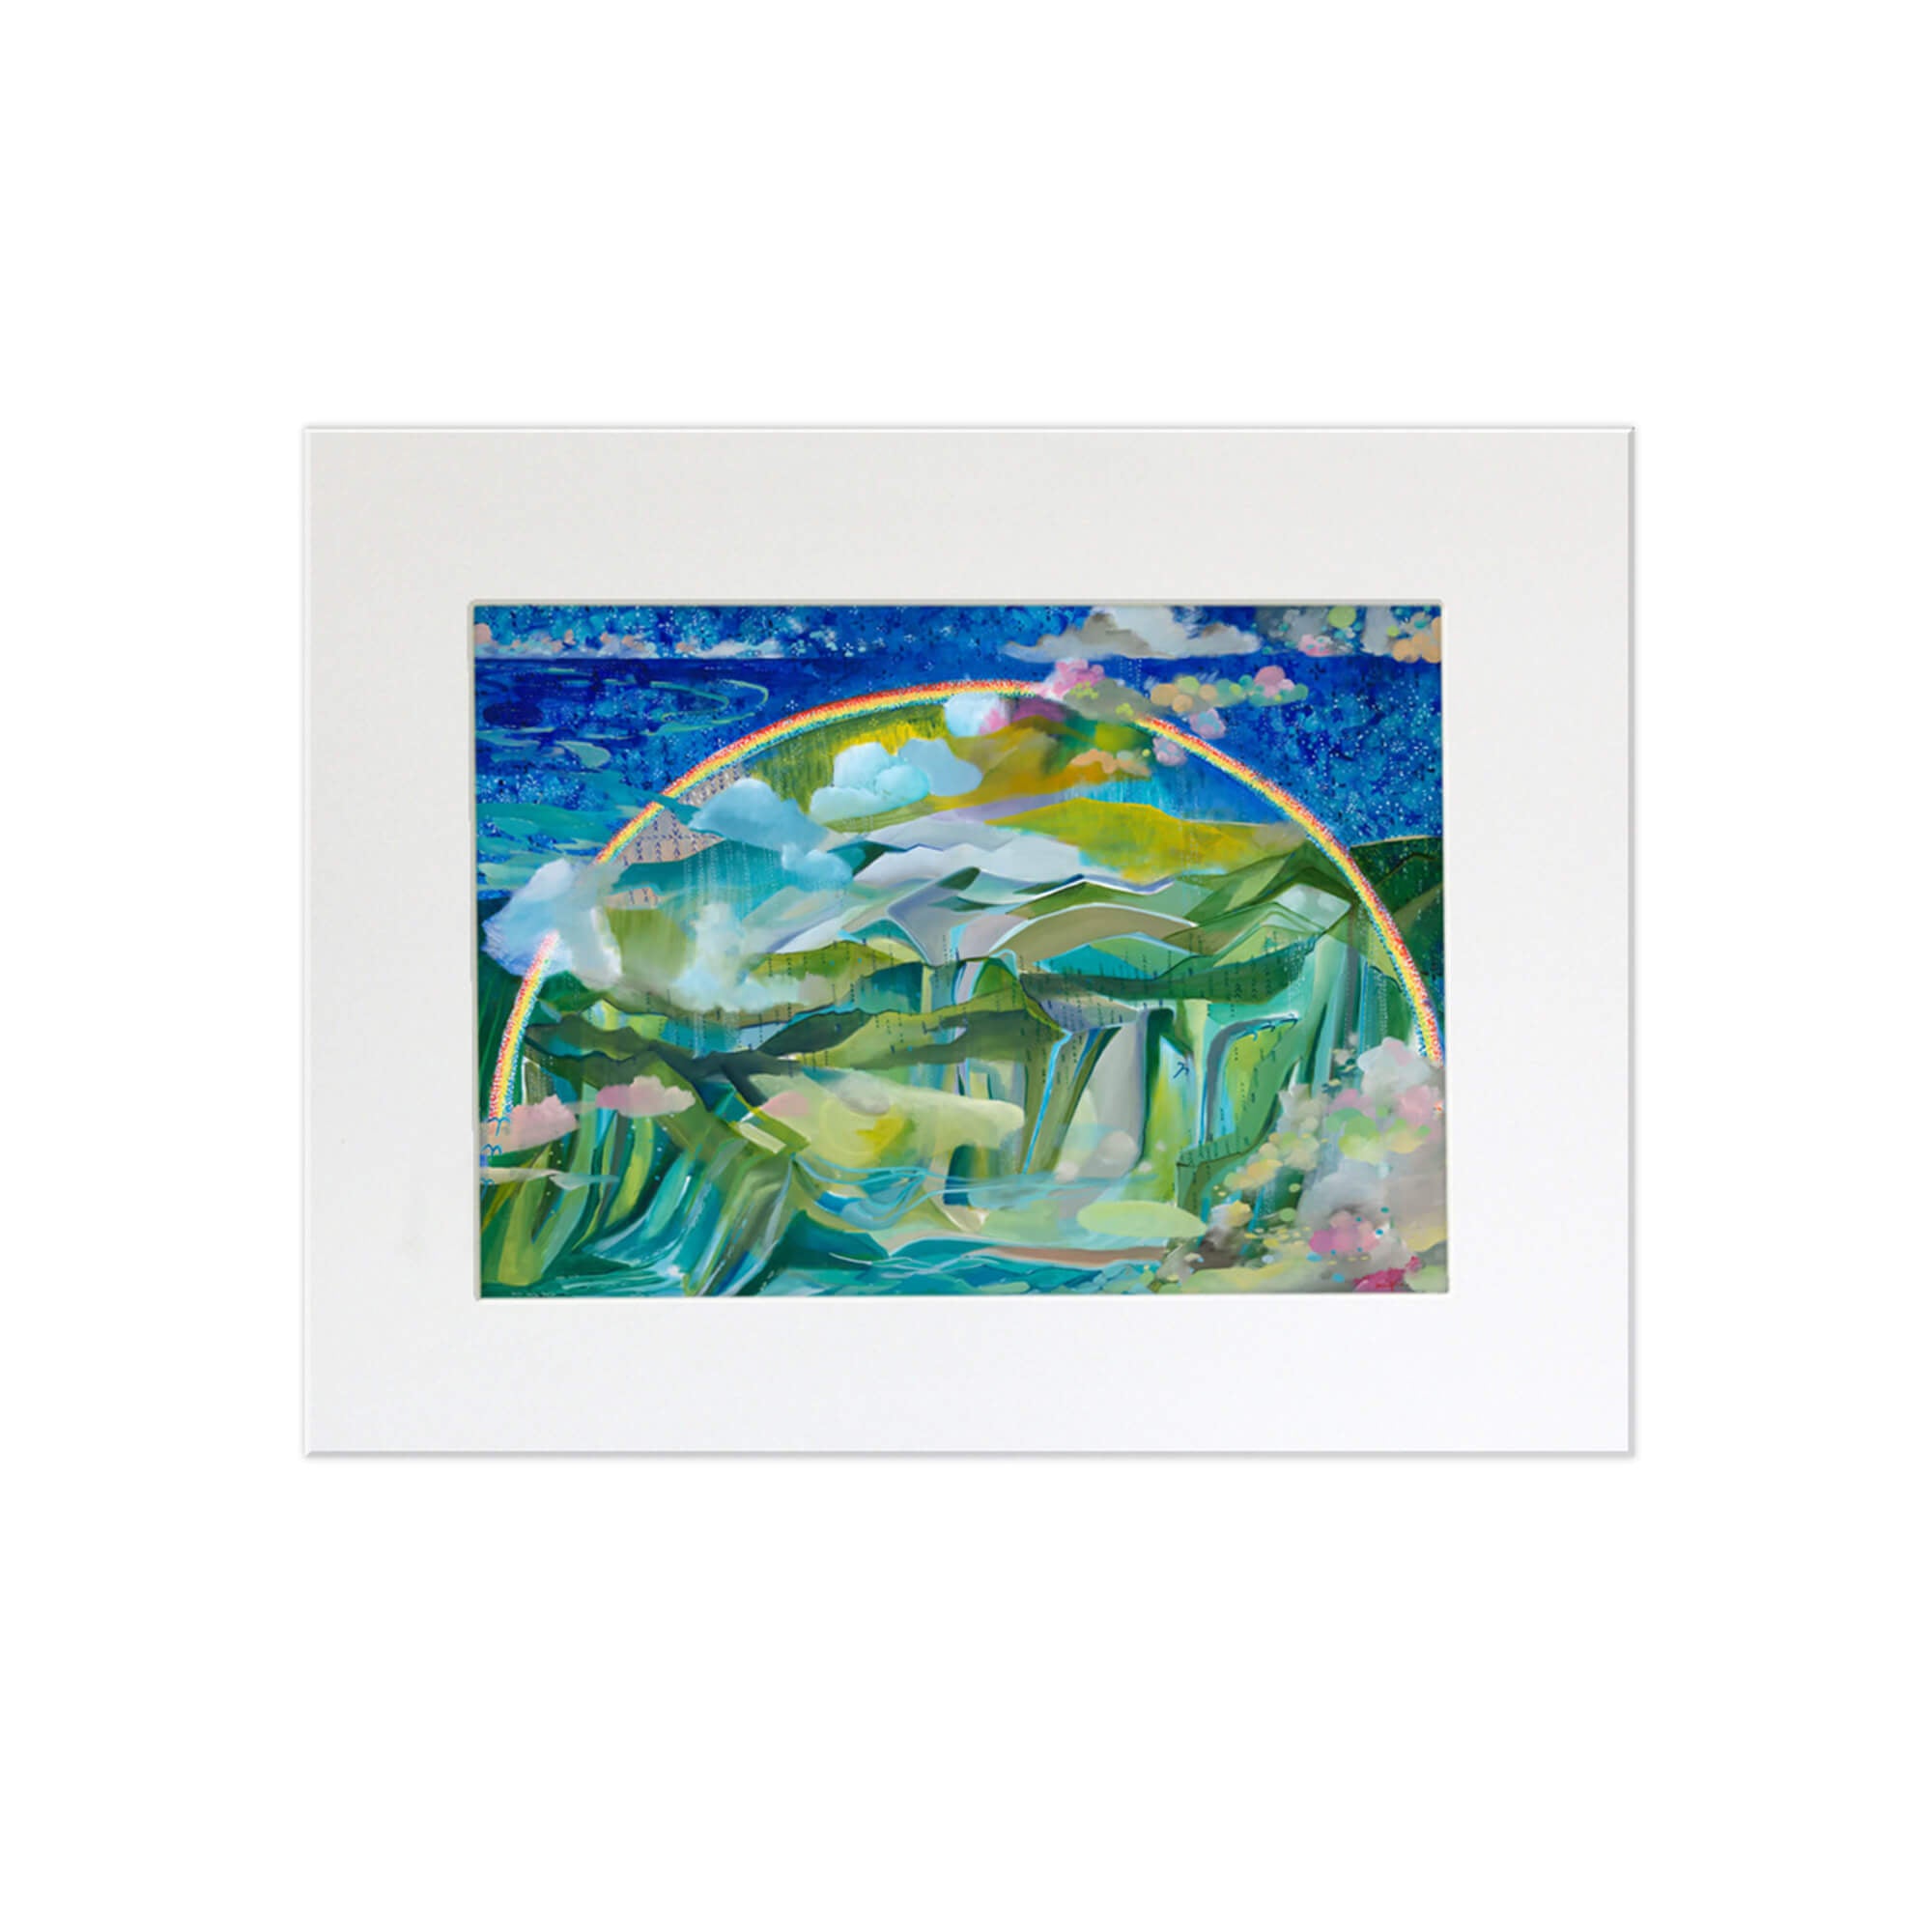 A matted art print of an abstract landscape with a rainbow over the mountains by Hawaii artist Saumolia Puapuaga 